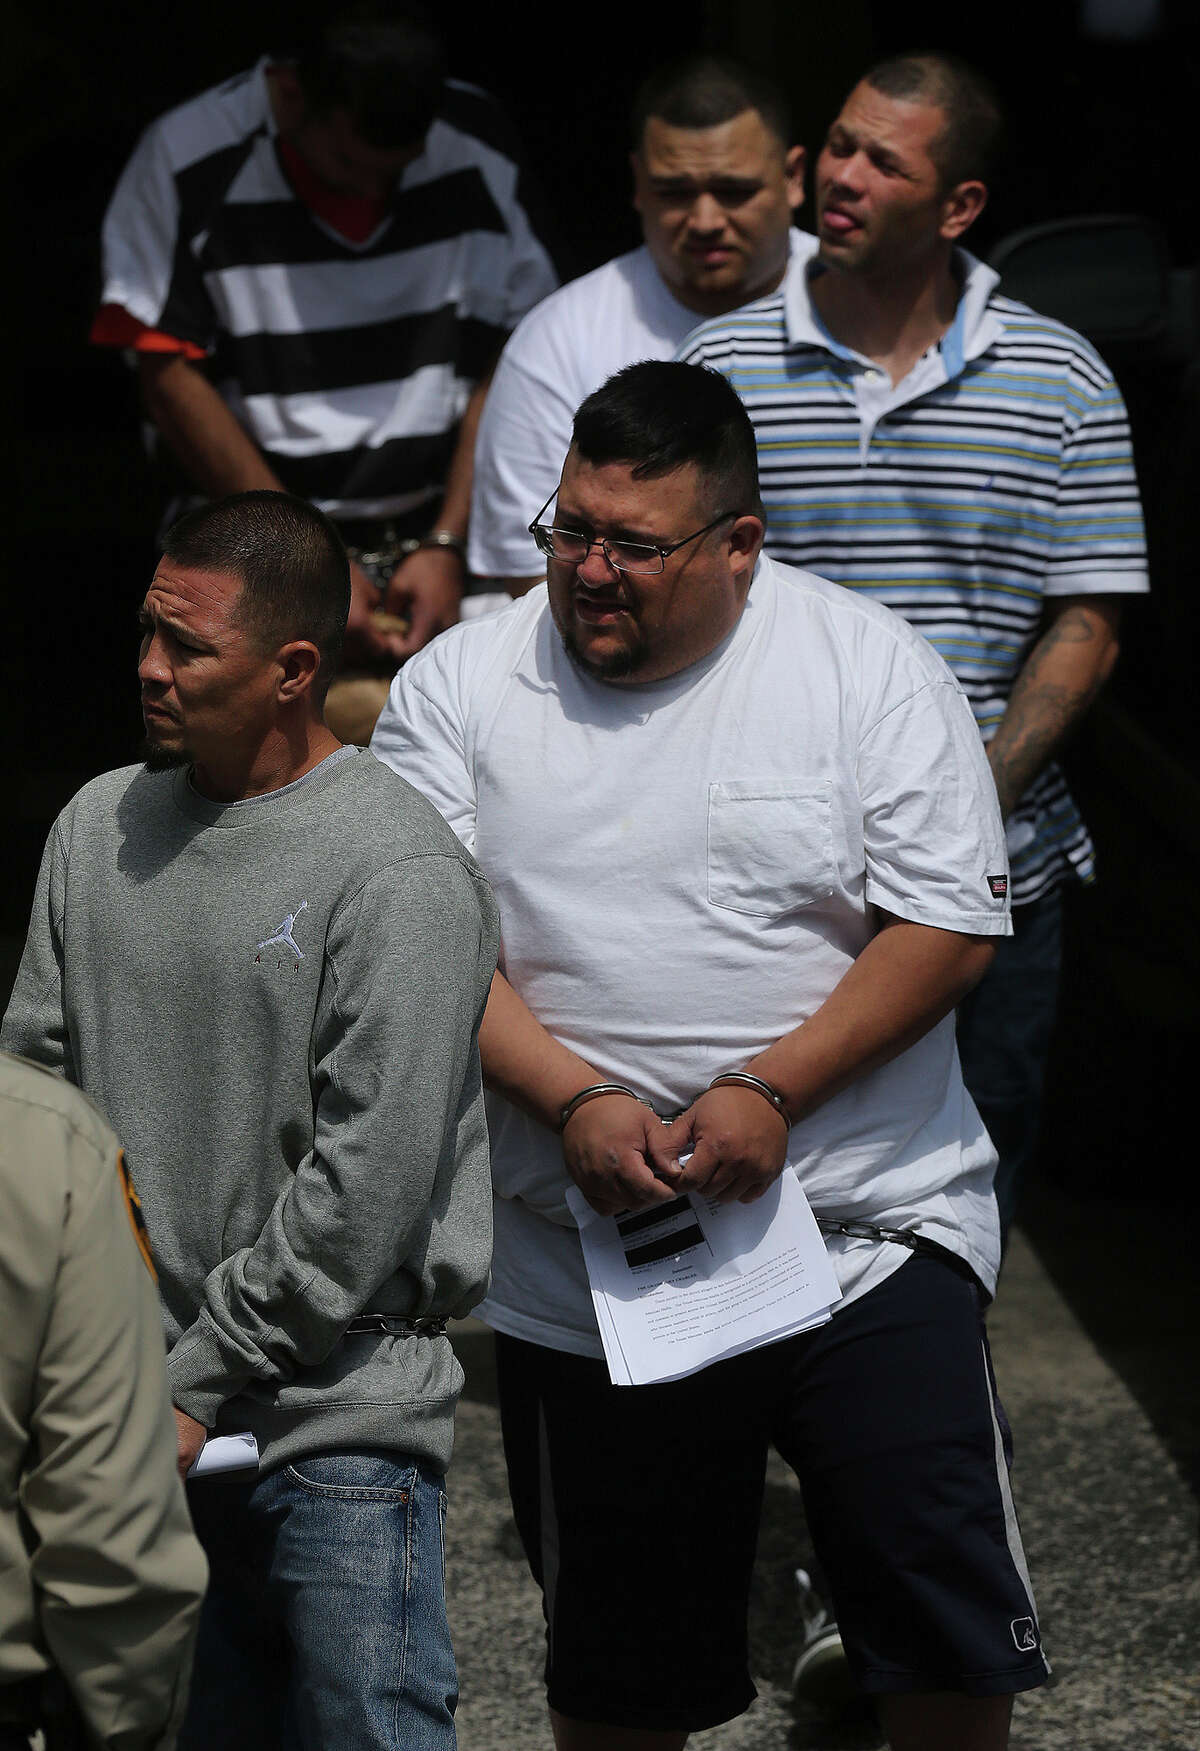 Suspects are led Friday April 15, 2016 out of the John H. Wood, Jr. Federal Courthouse after an area roundup of arrests were made targeting the Mexican Mafia. In front is Mario Albert Leal, Jr., behind him (white shirt, heavy set) is Cruz Carlos Acosta, behind him (striped polo) is David Phillip Urdiales, aka the "termite", and behind him is Eddie Flores.